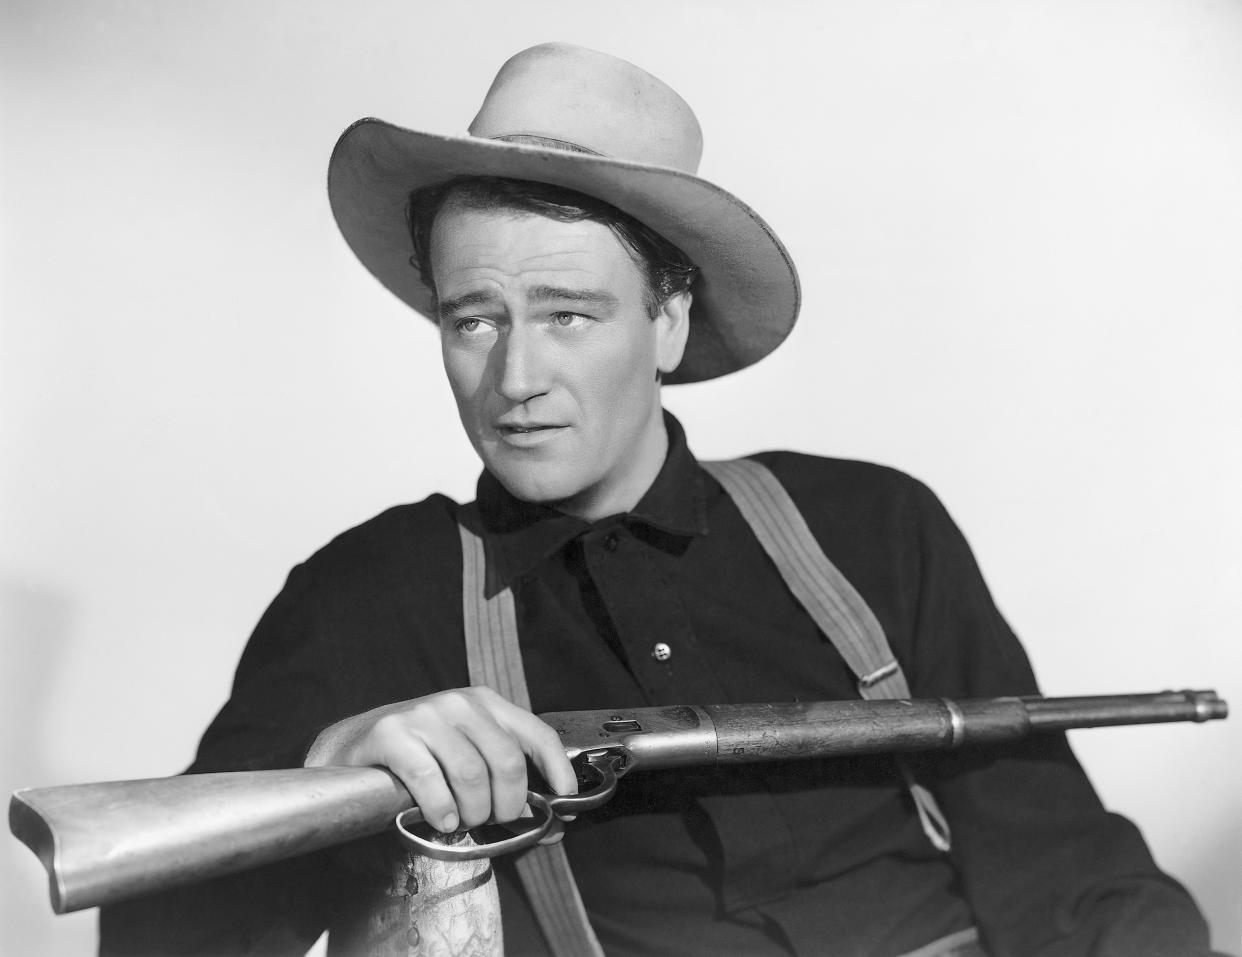 John Wayne holding a rifle in a publicity photo for the movie Shepherd of the Hills.